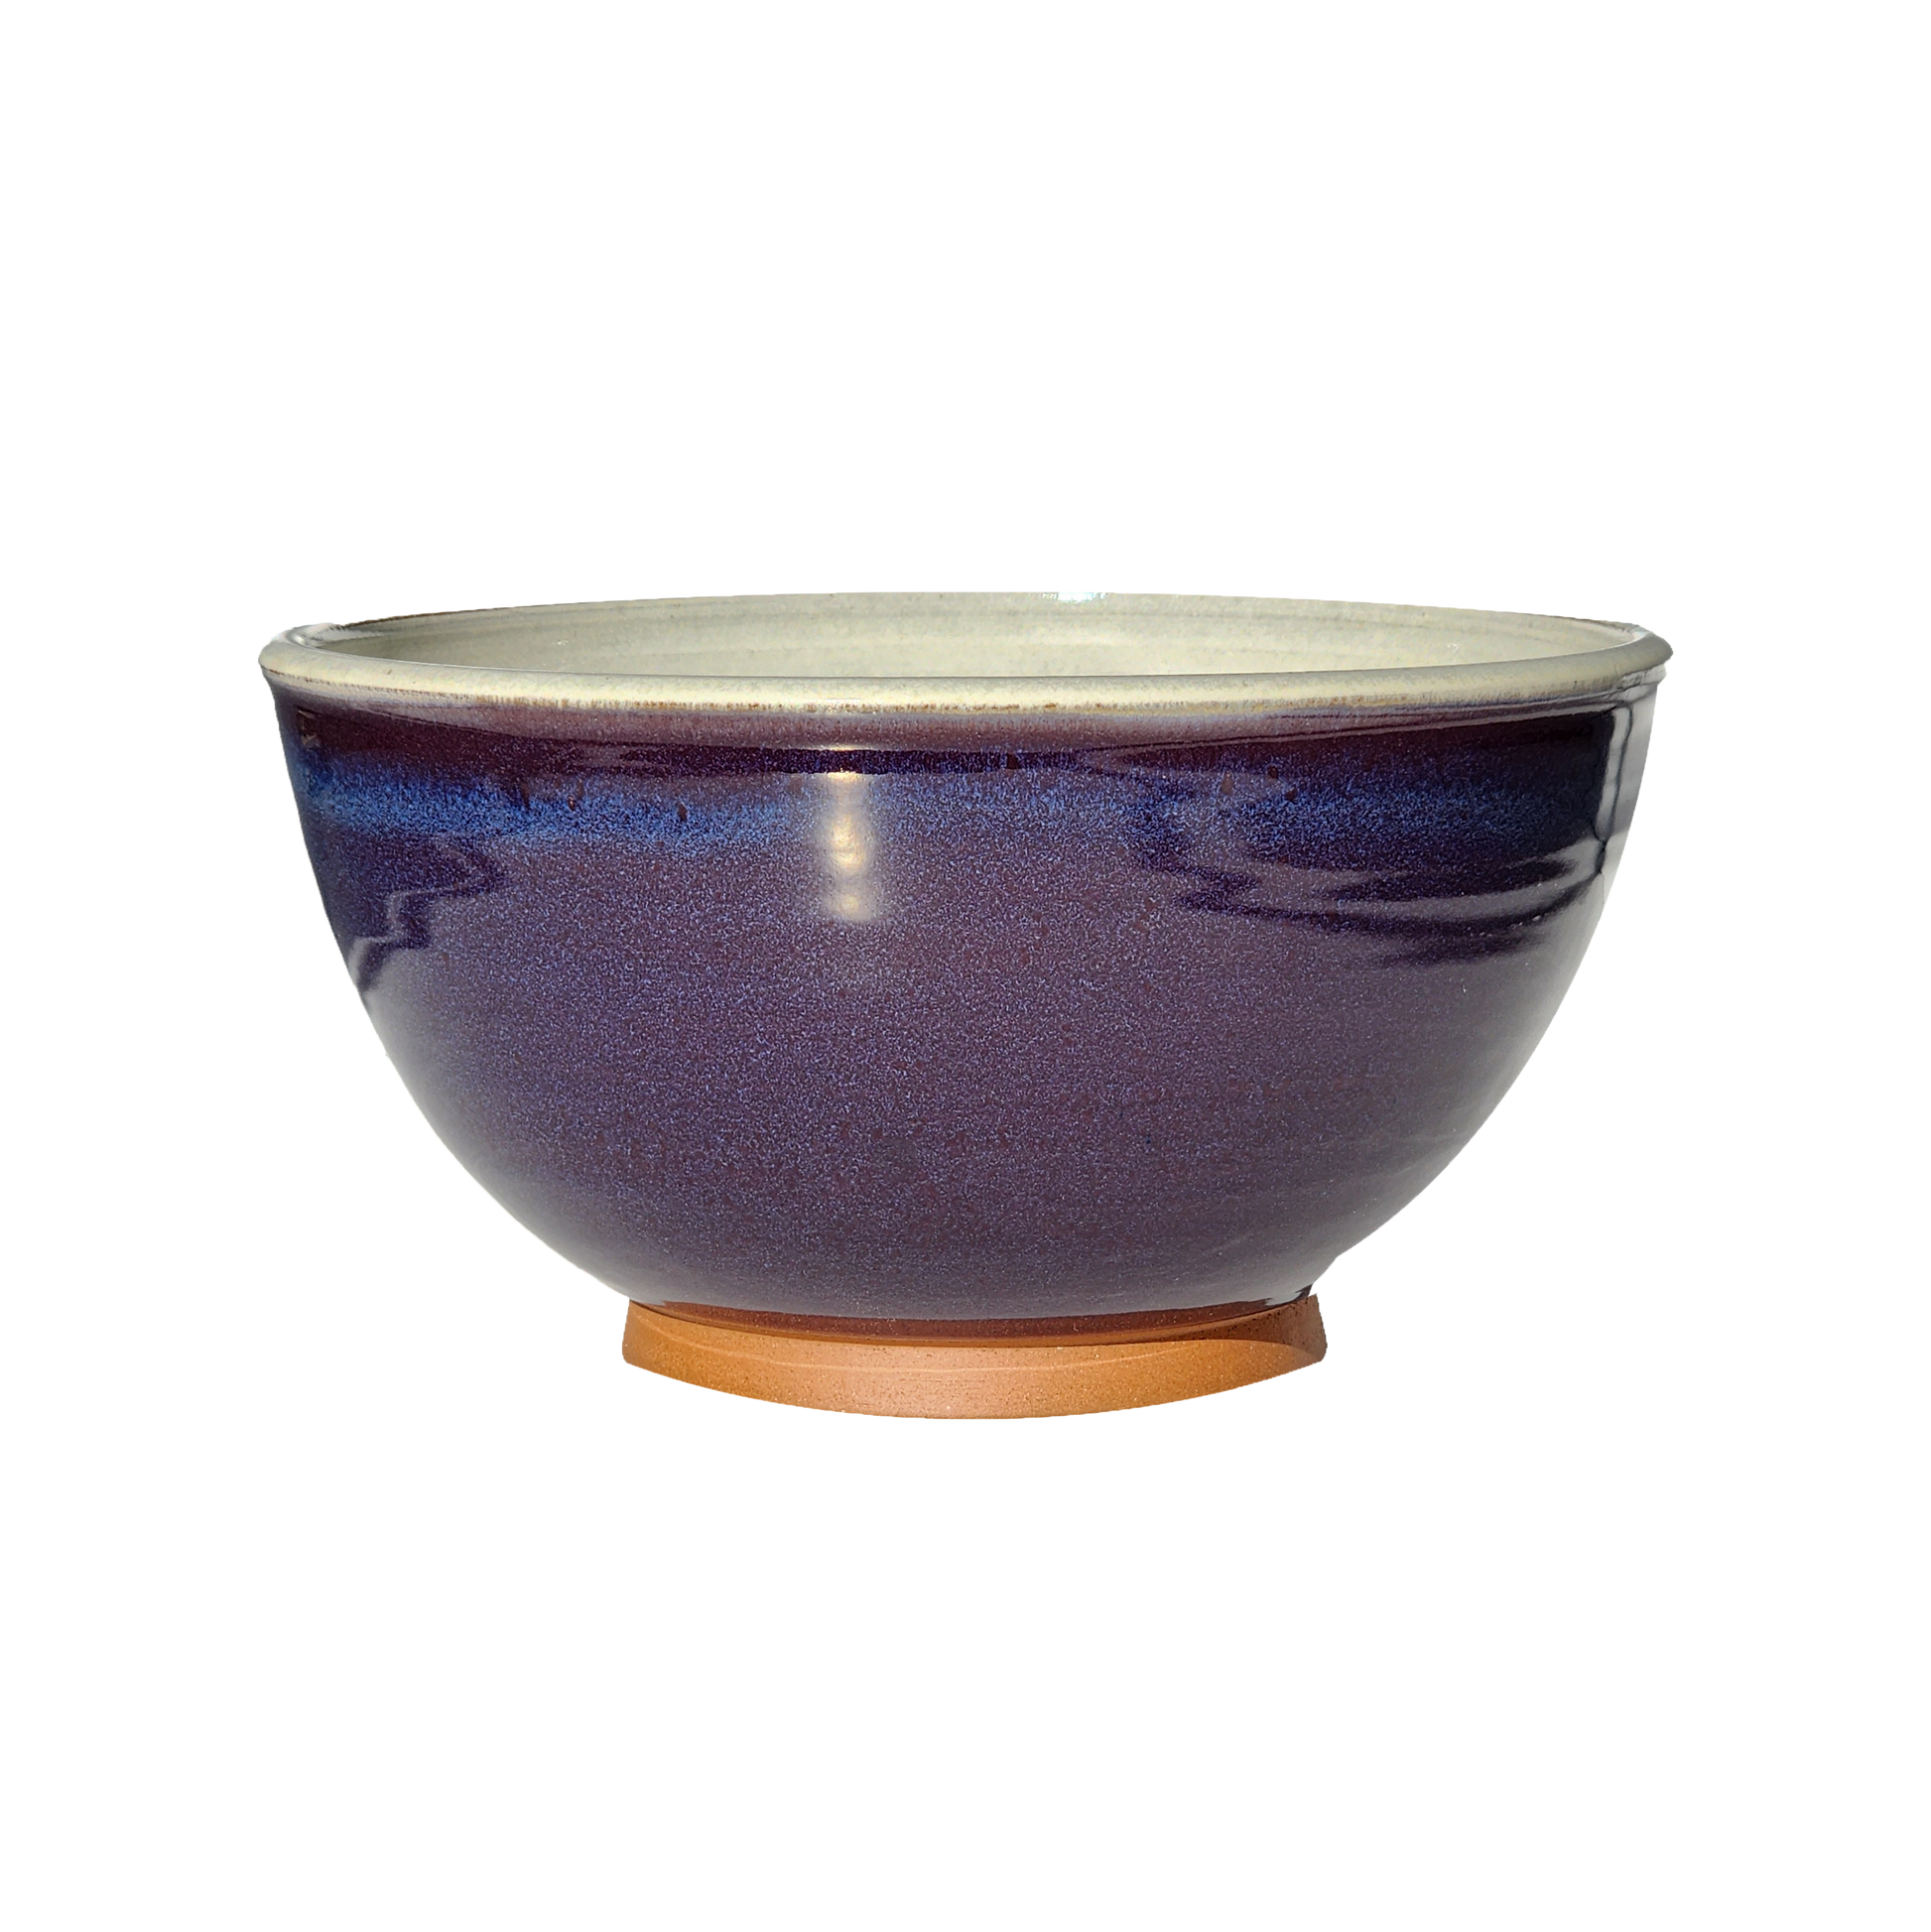 Image: A large mixing bowl in royal purple, offering generous space with a capacity of 12.5 cups. Make a bold statement in your kitchen with this regal and vibrant color.